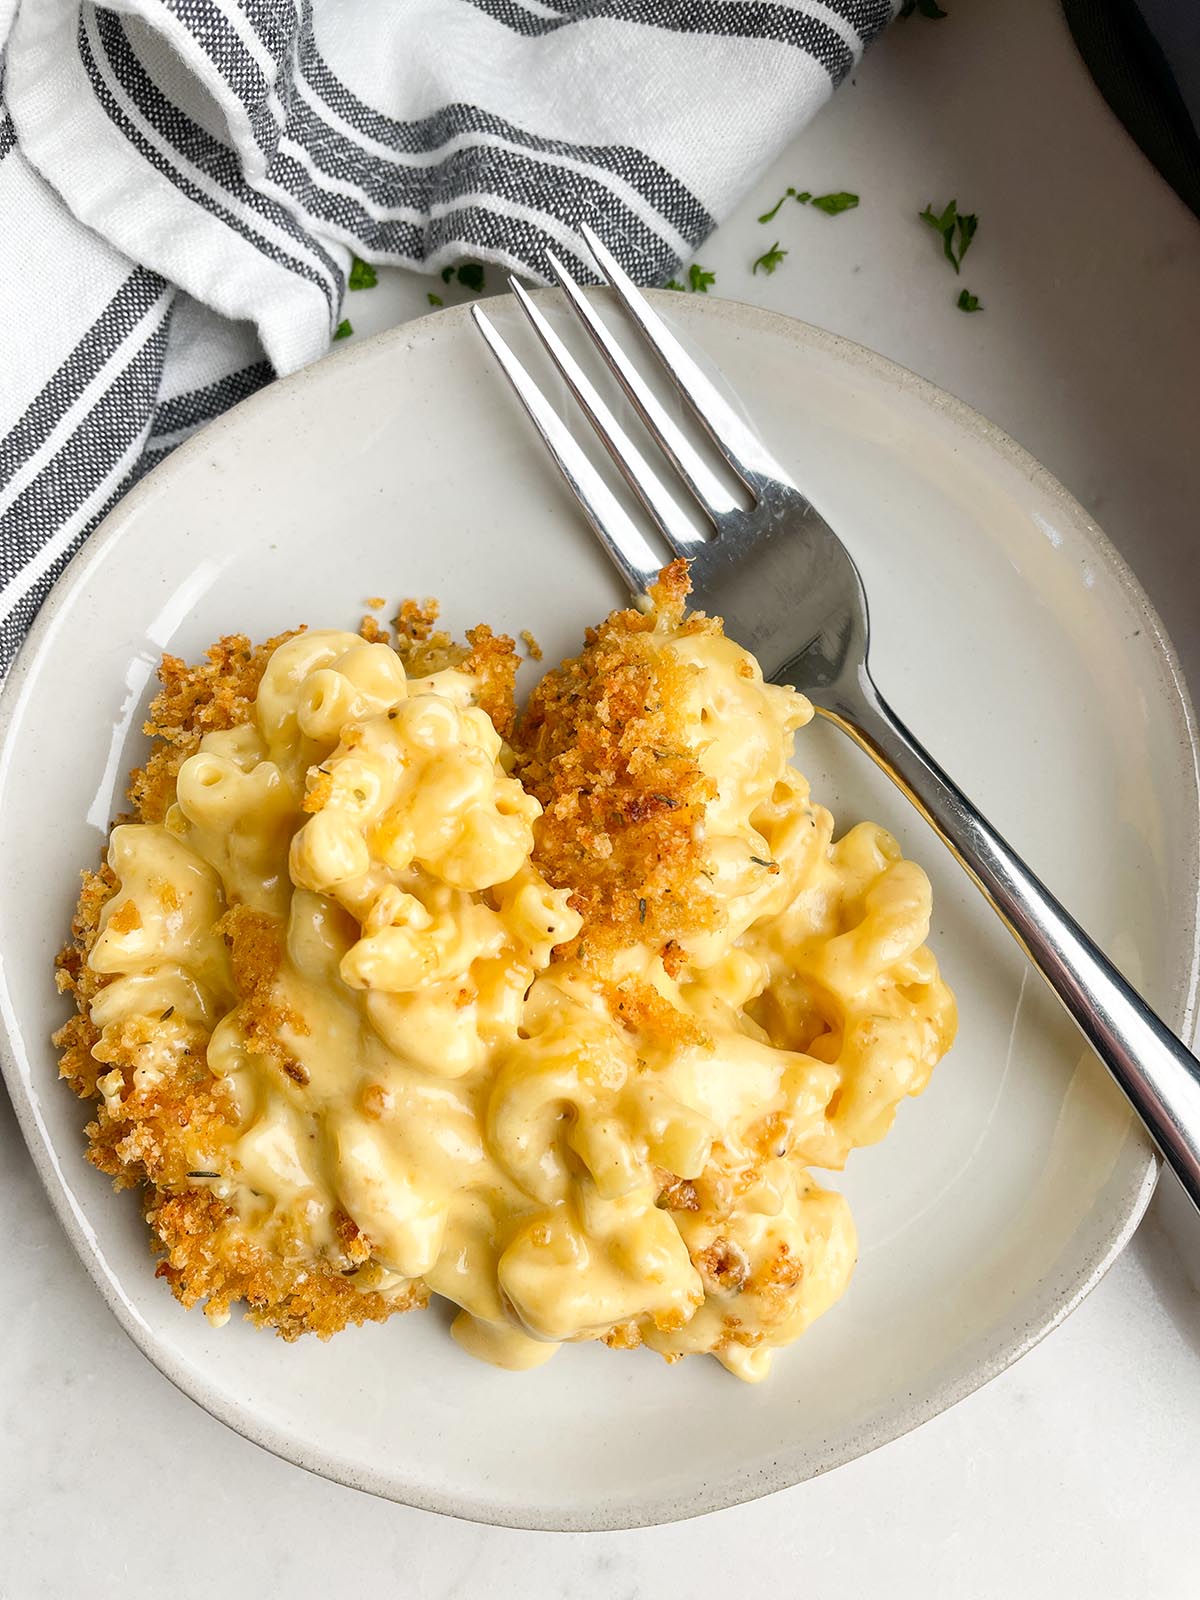 plate with macaroni and cheese on it and a fork next to it.